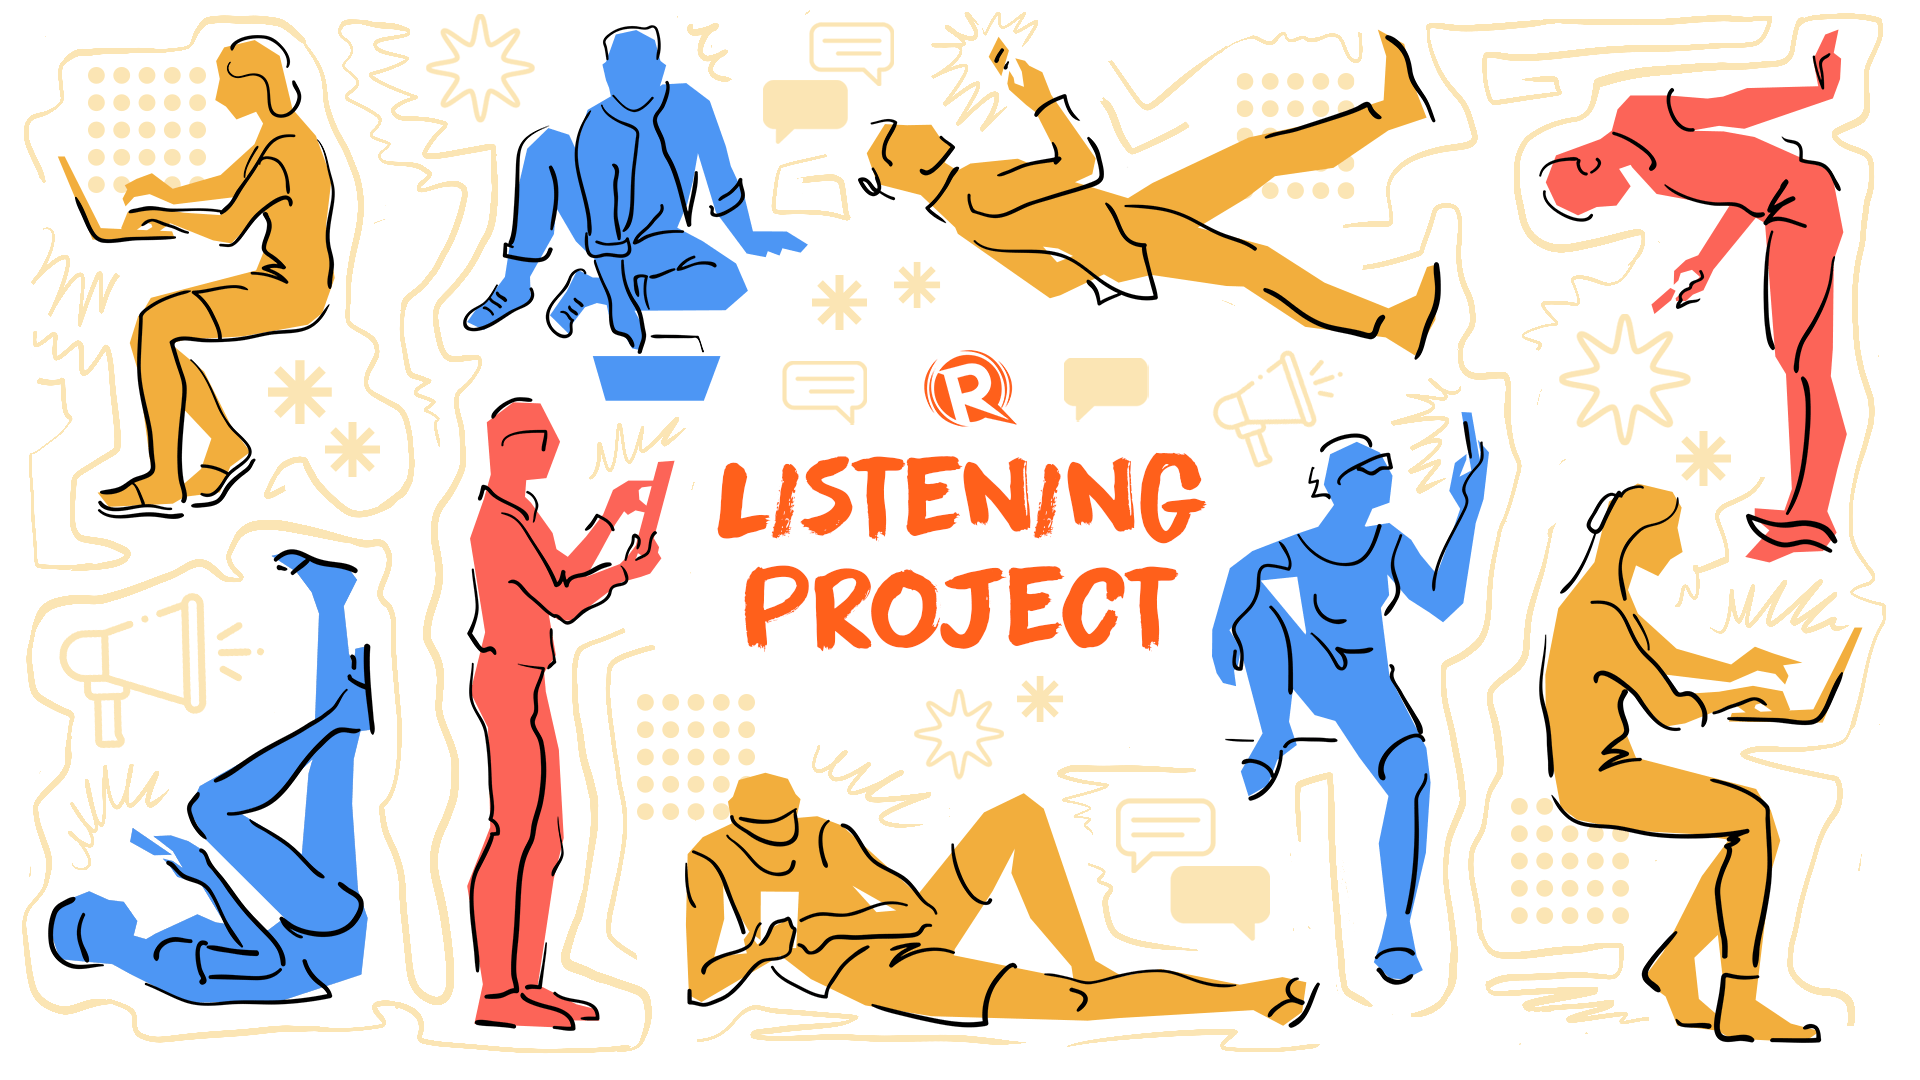 [Be The Good] Introducing ‘The Listening Project’